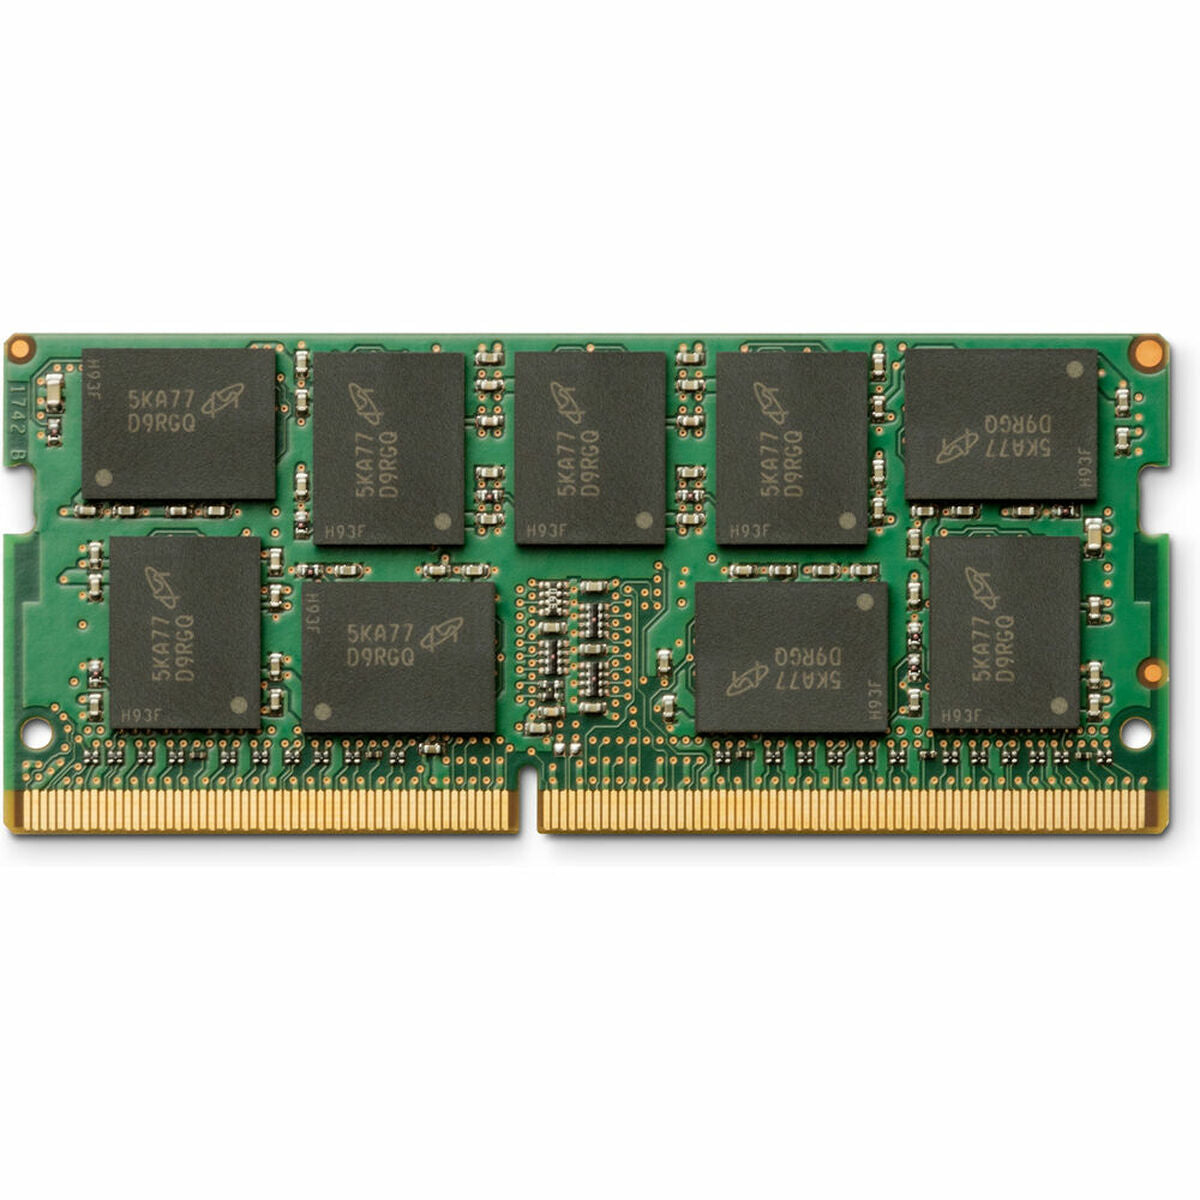 RAM Memory HP 141H6AA 32 GB DDR4, HP, Computing, Components, memory-card-hp-141h6aa-ddr4, Brand_HP, category-reference-2609, category-reference-2803, category-reference-2807, category-reference-t-19685, category-reference-t-19912, category-reference-t-21360, computers / components, Condition_NEW, Price_500 - 600, Teleworking, RiotNook